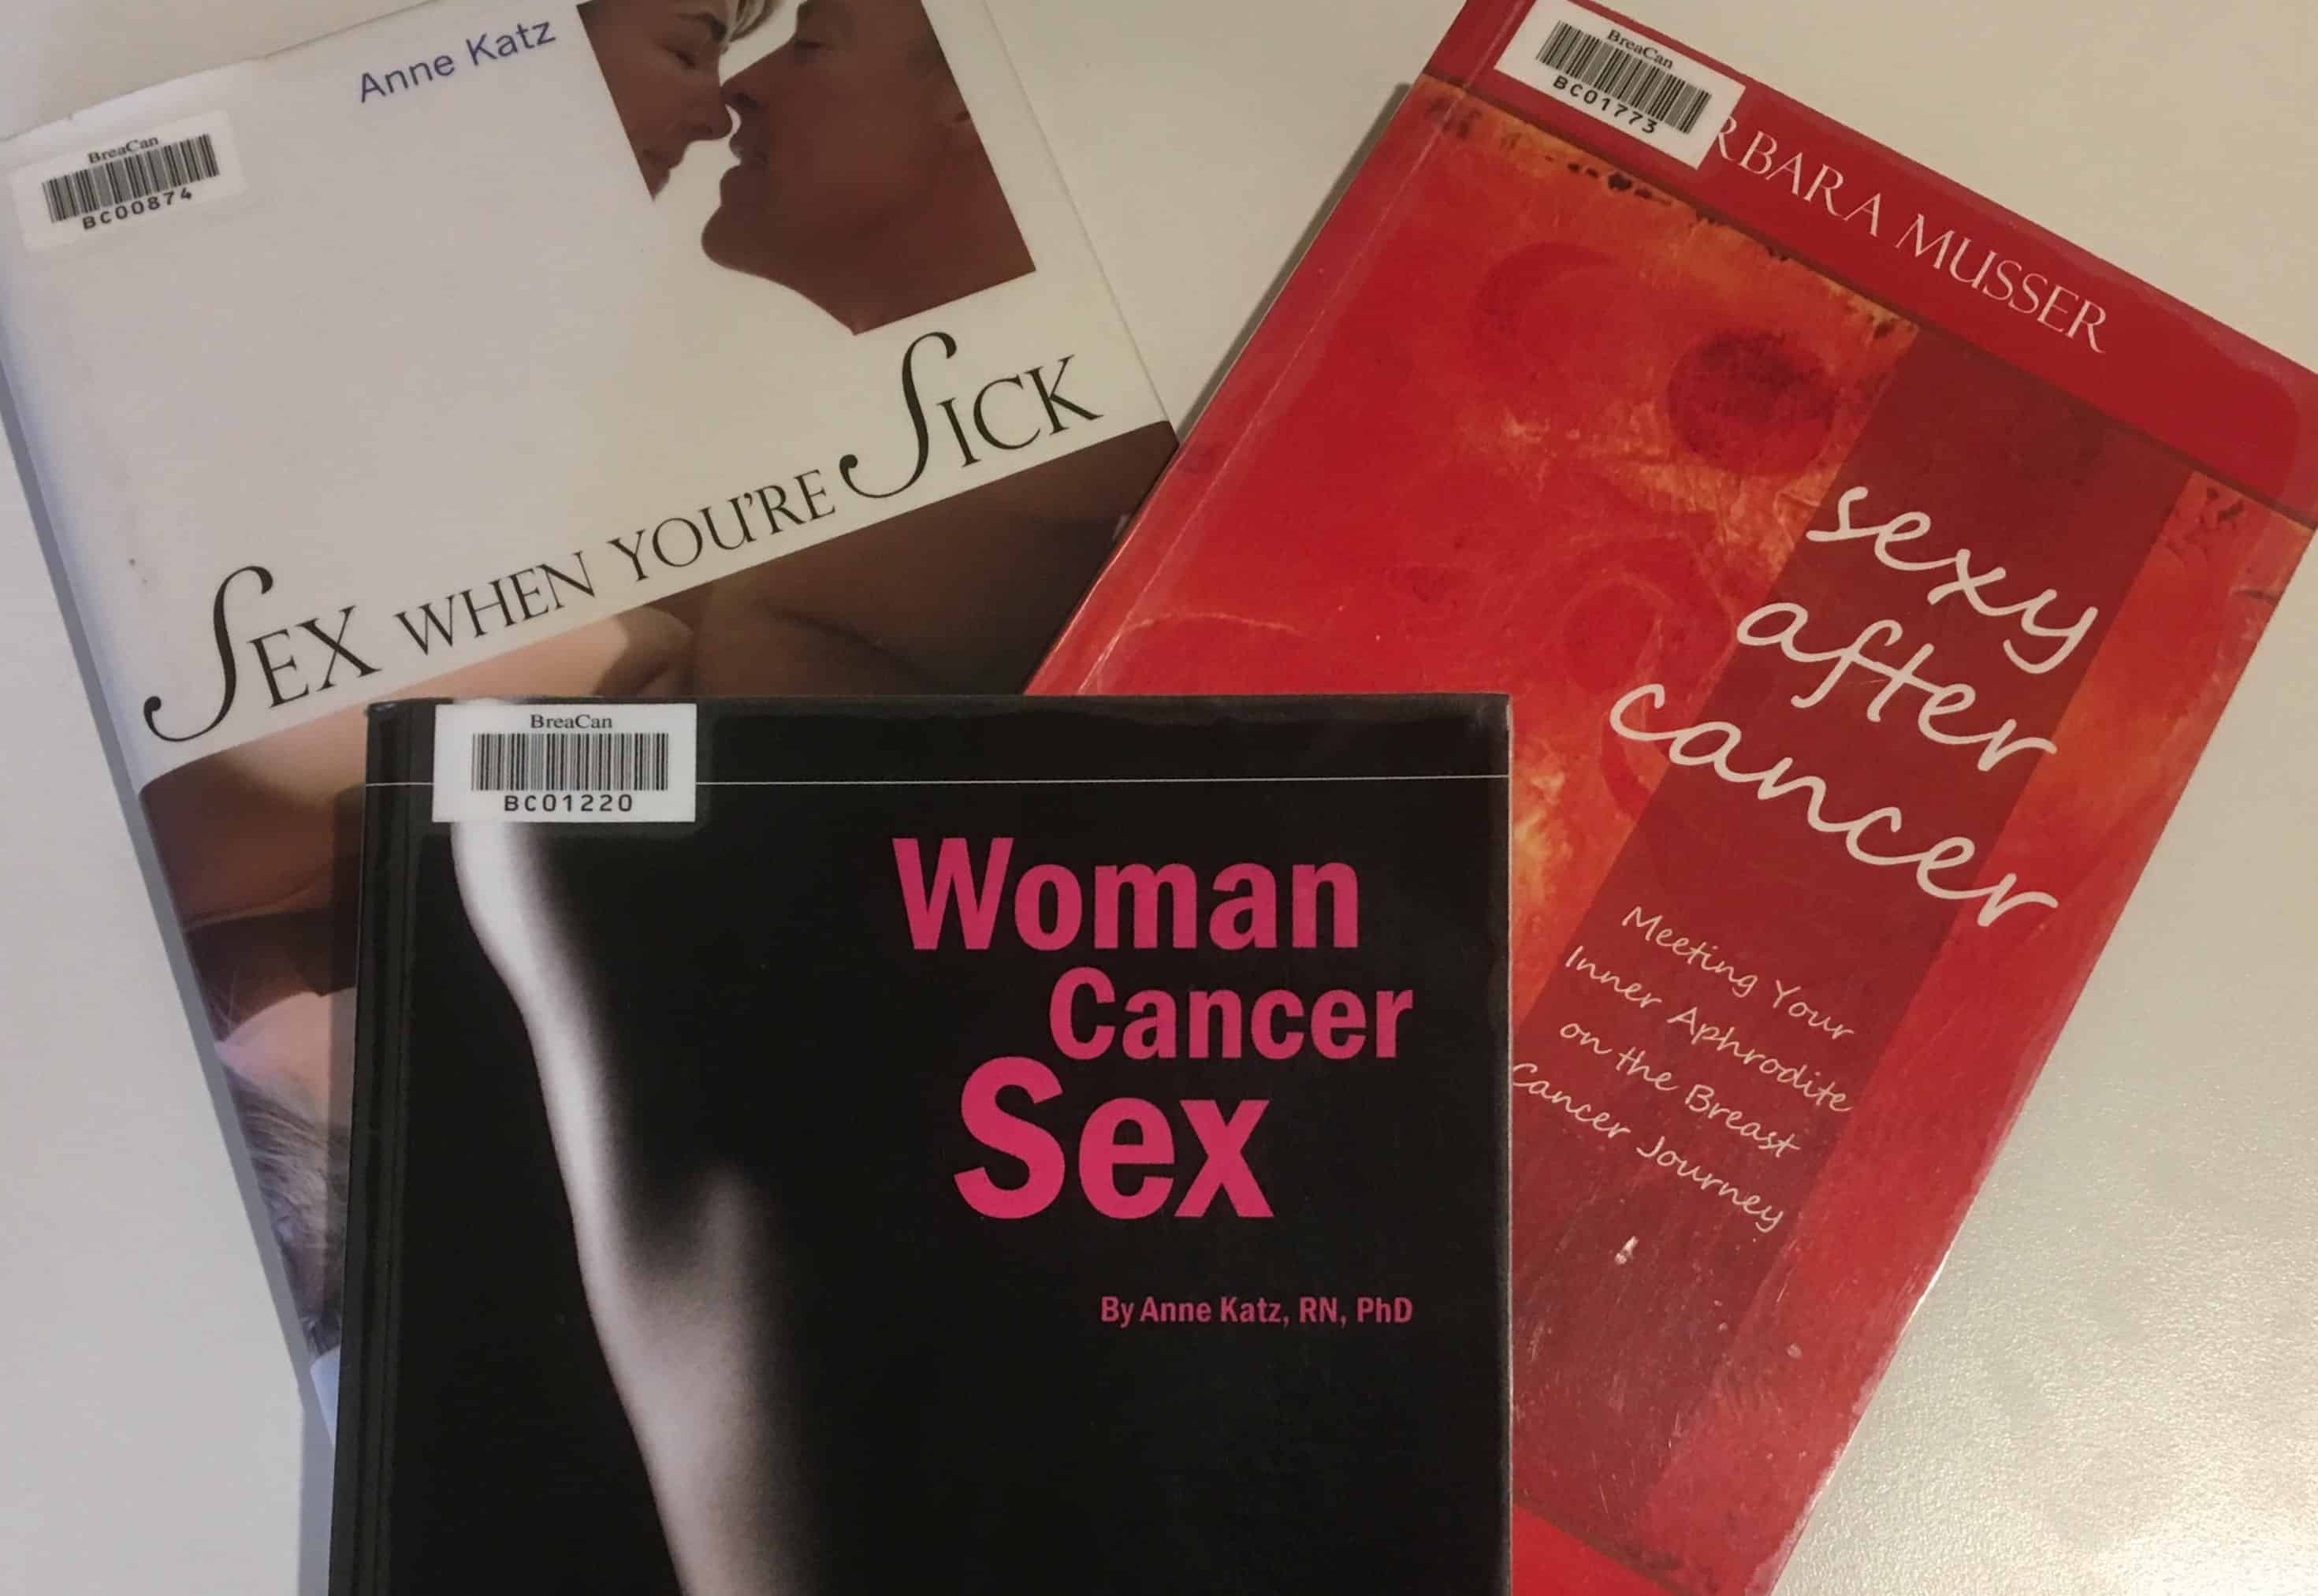 Covers of the books 'Woman cancer sex', 'Sexy after cancer' and 'Sex when you're sick'.